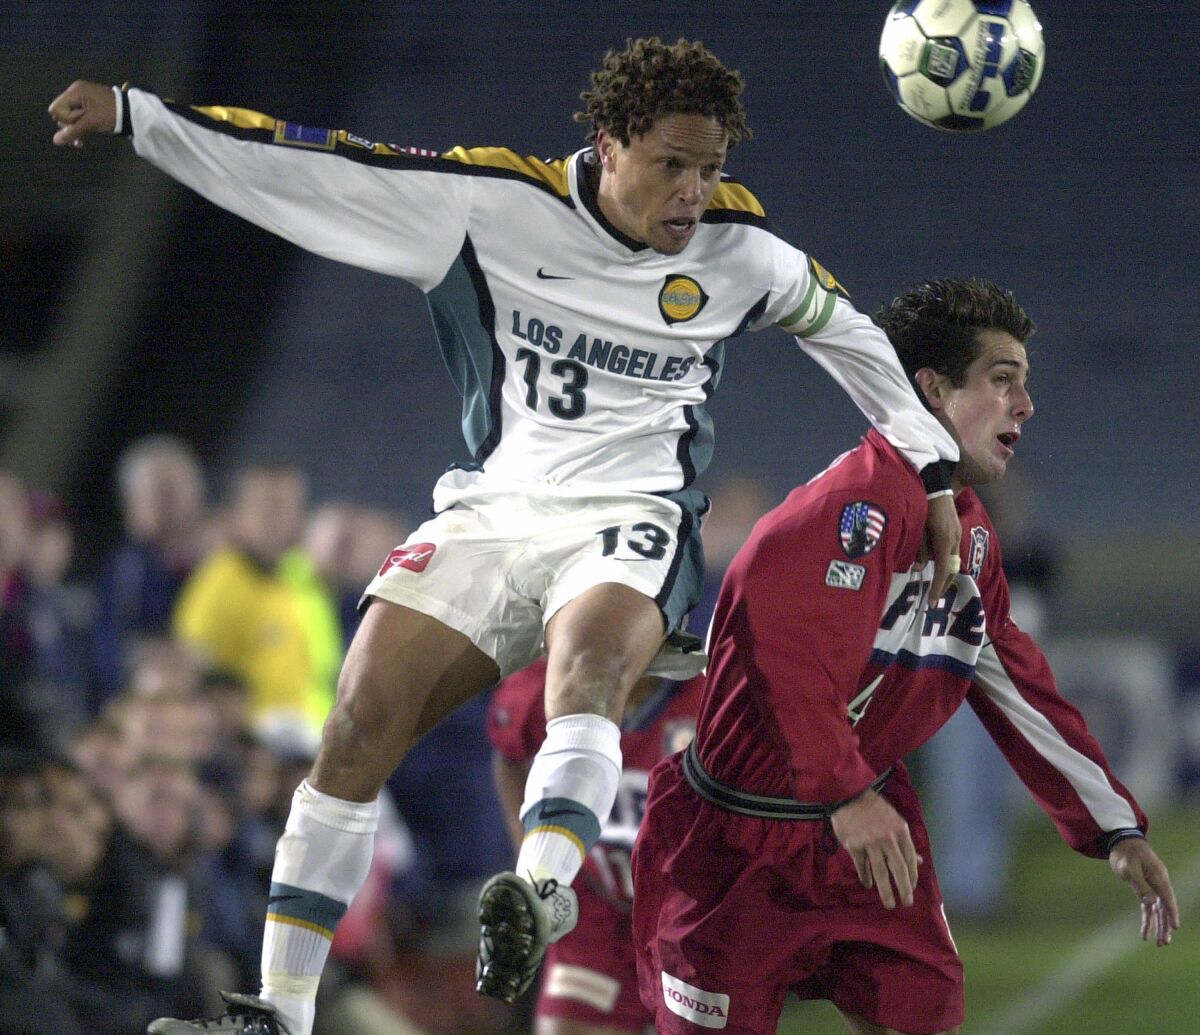 The Galaxy's Cobi Jones (13) heads the ball above the Chicago Fire's Carlos Bocanegra during a 2001 match